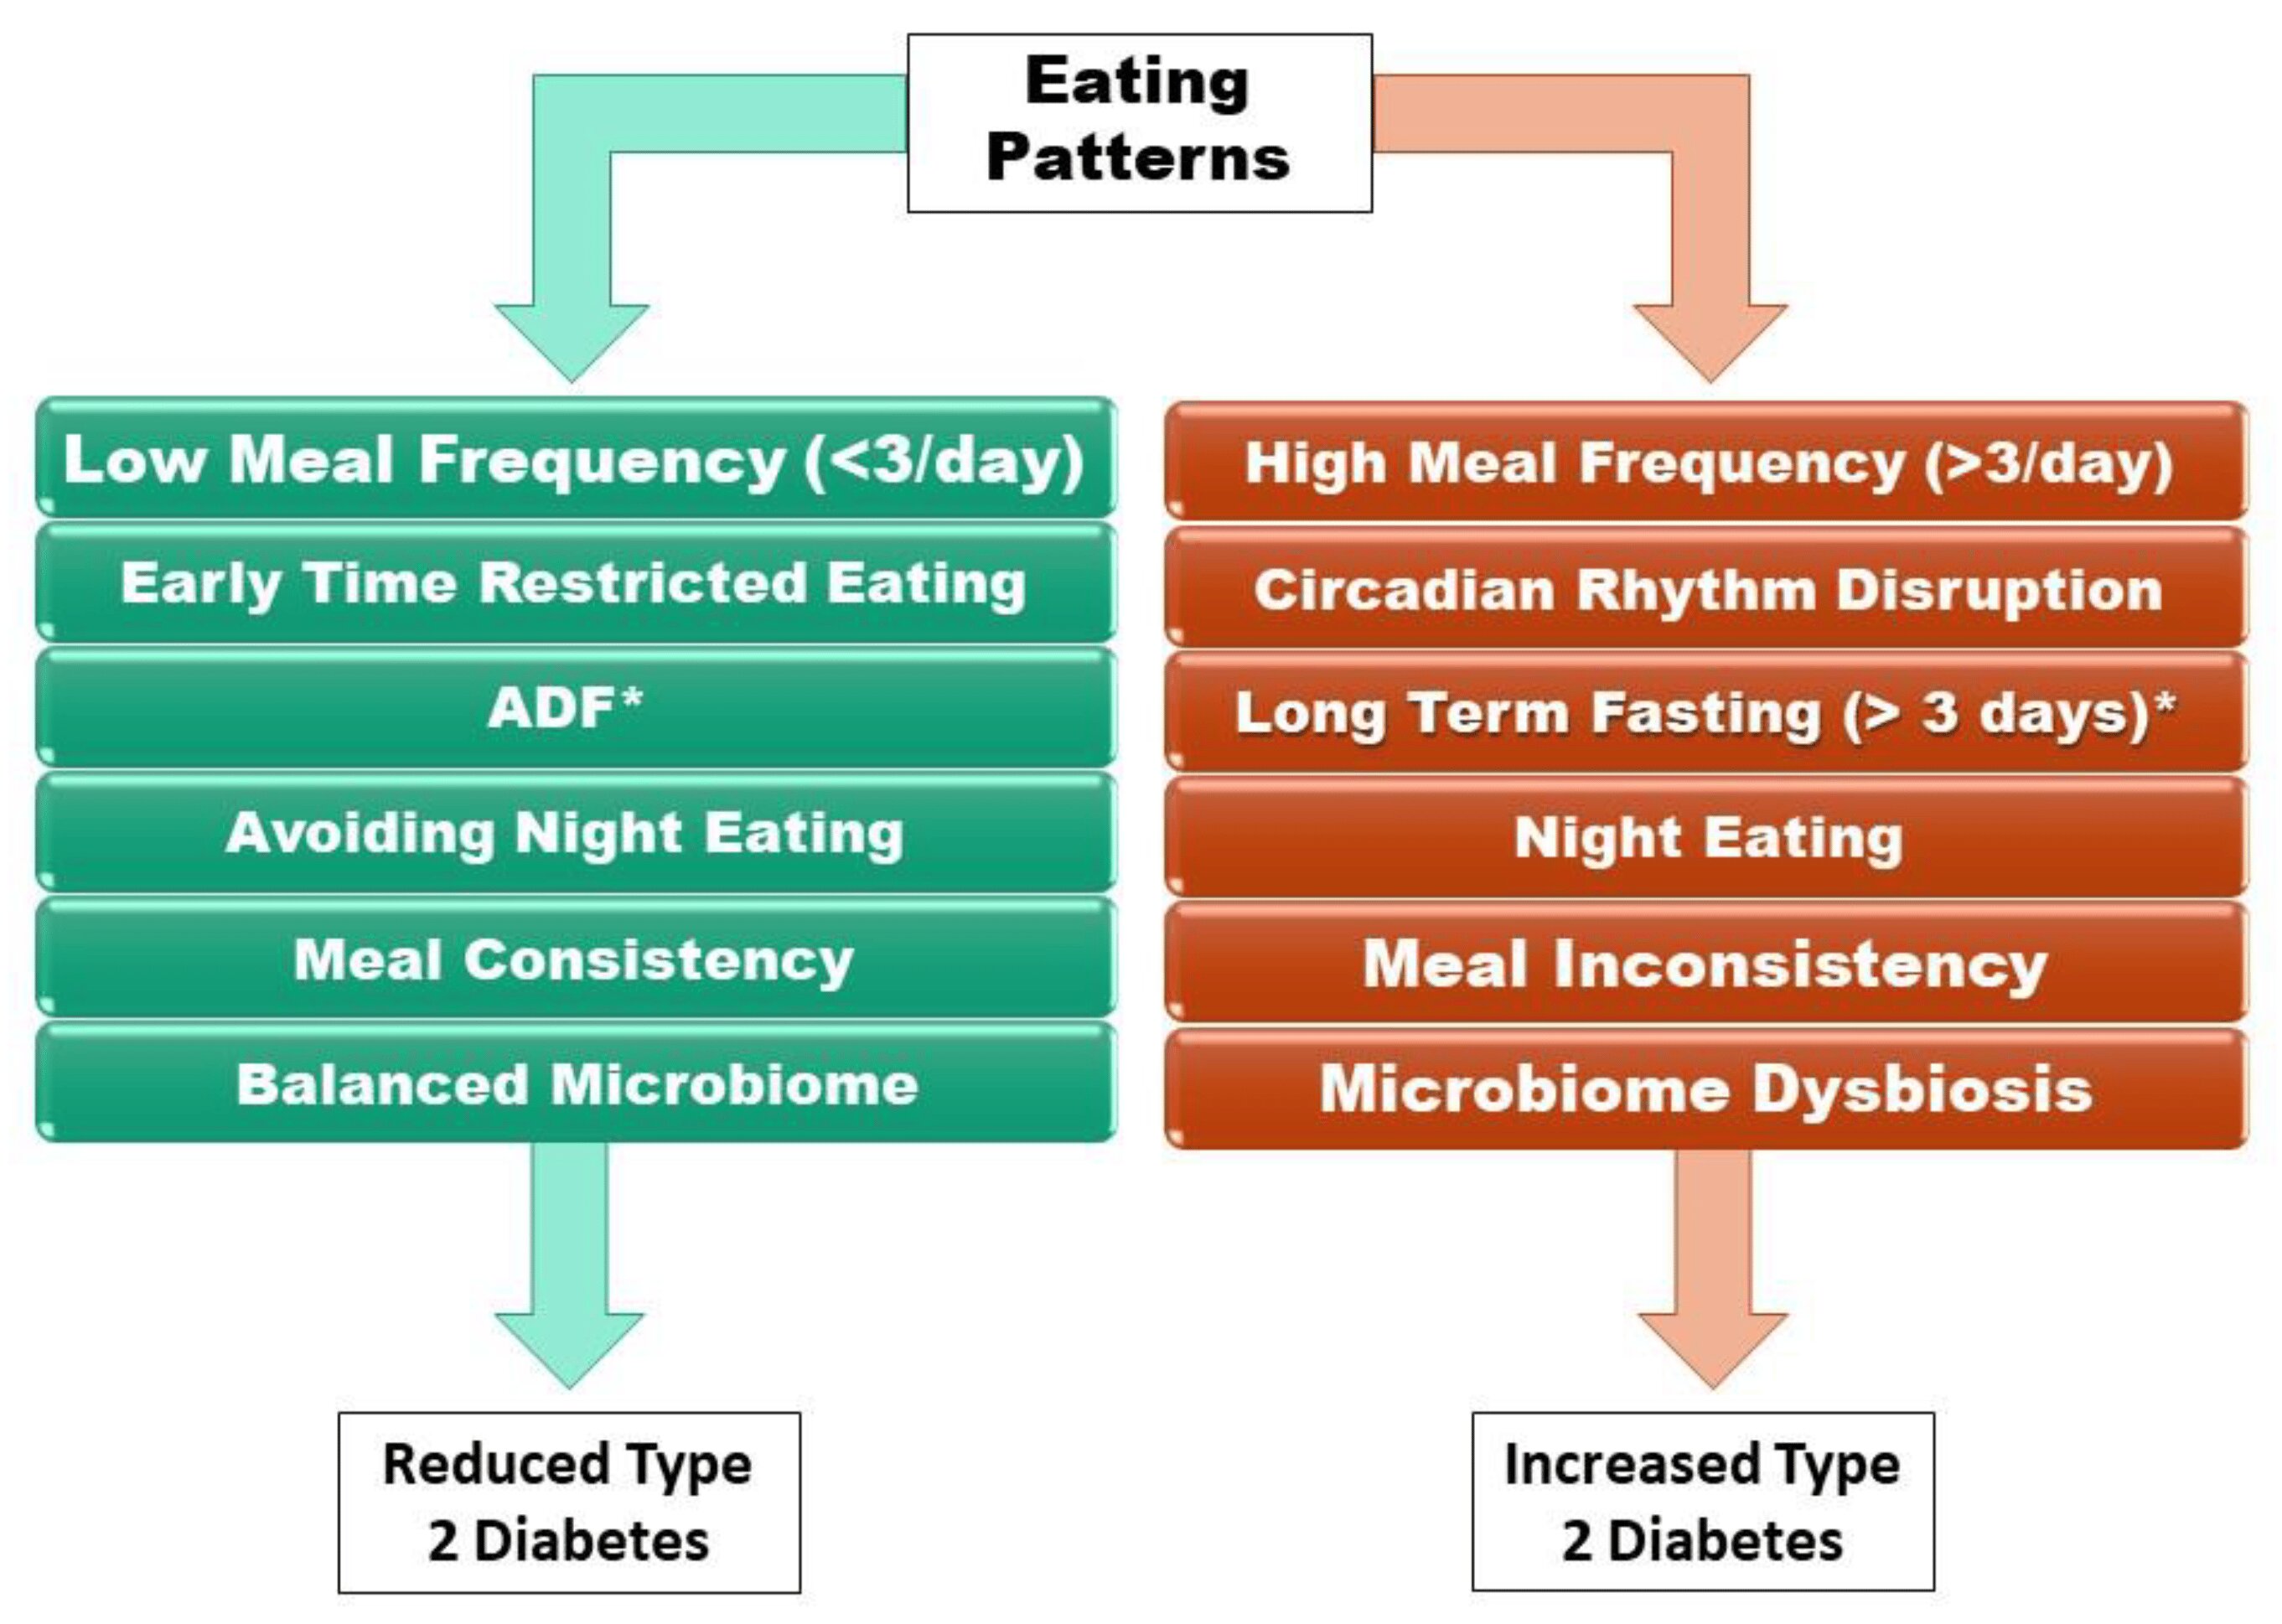 Alternate-day fasting and diabetes prevention